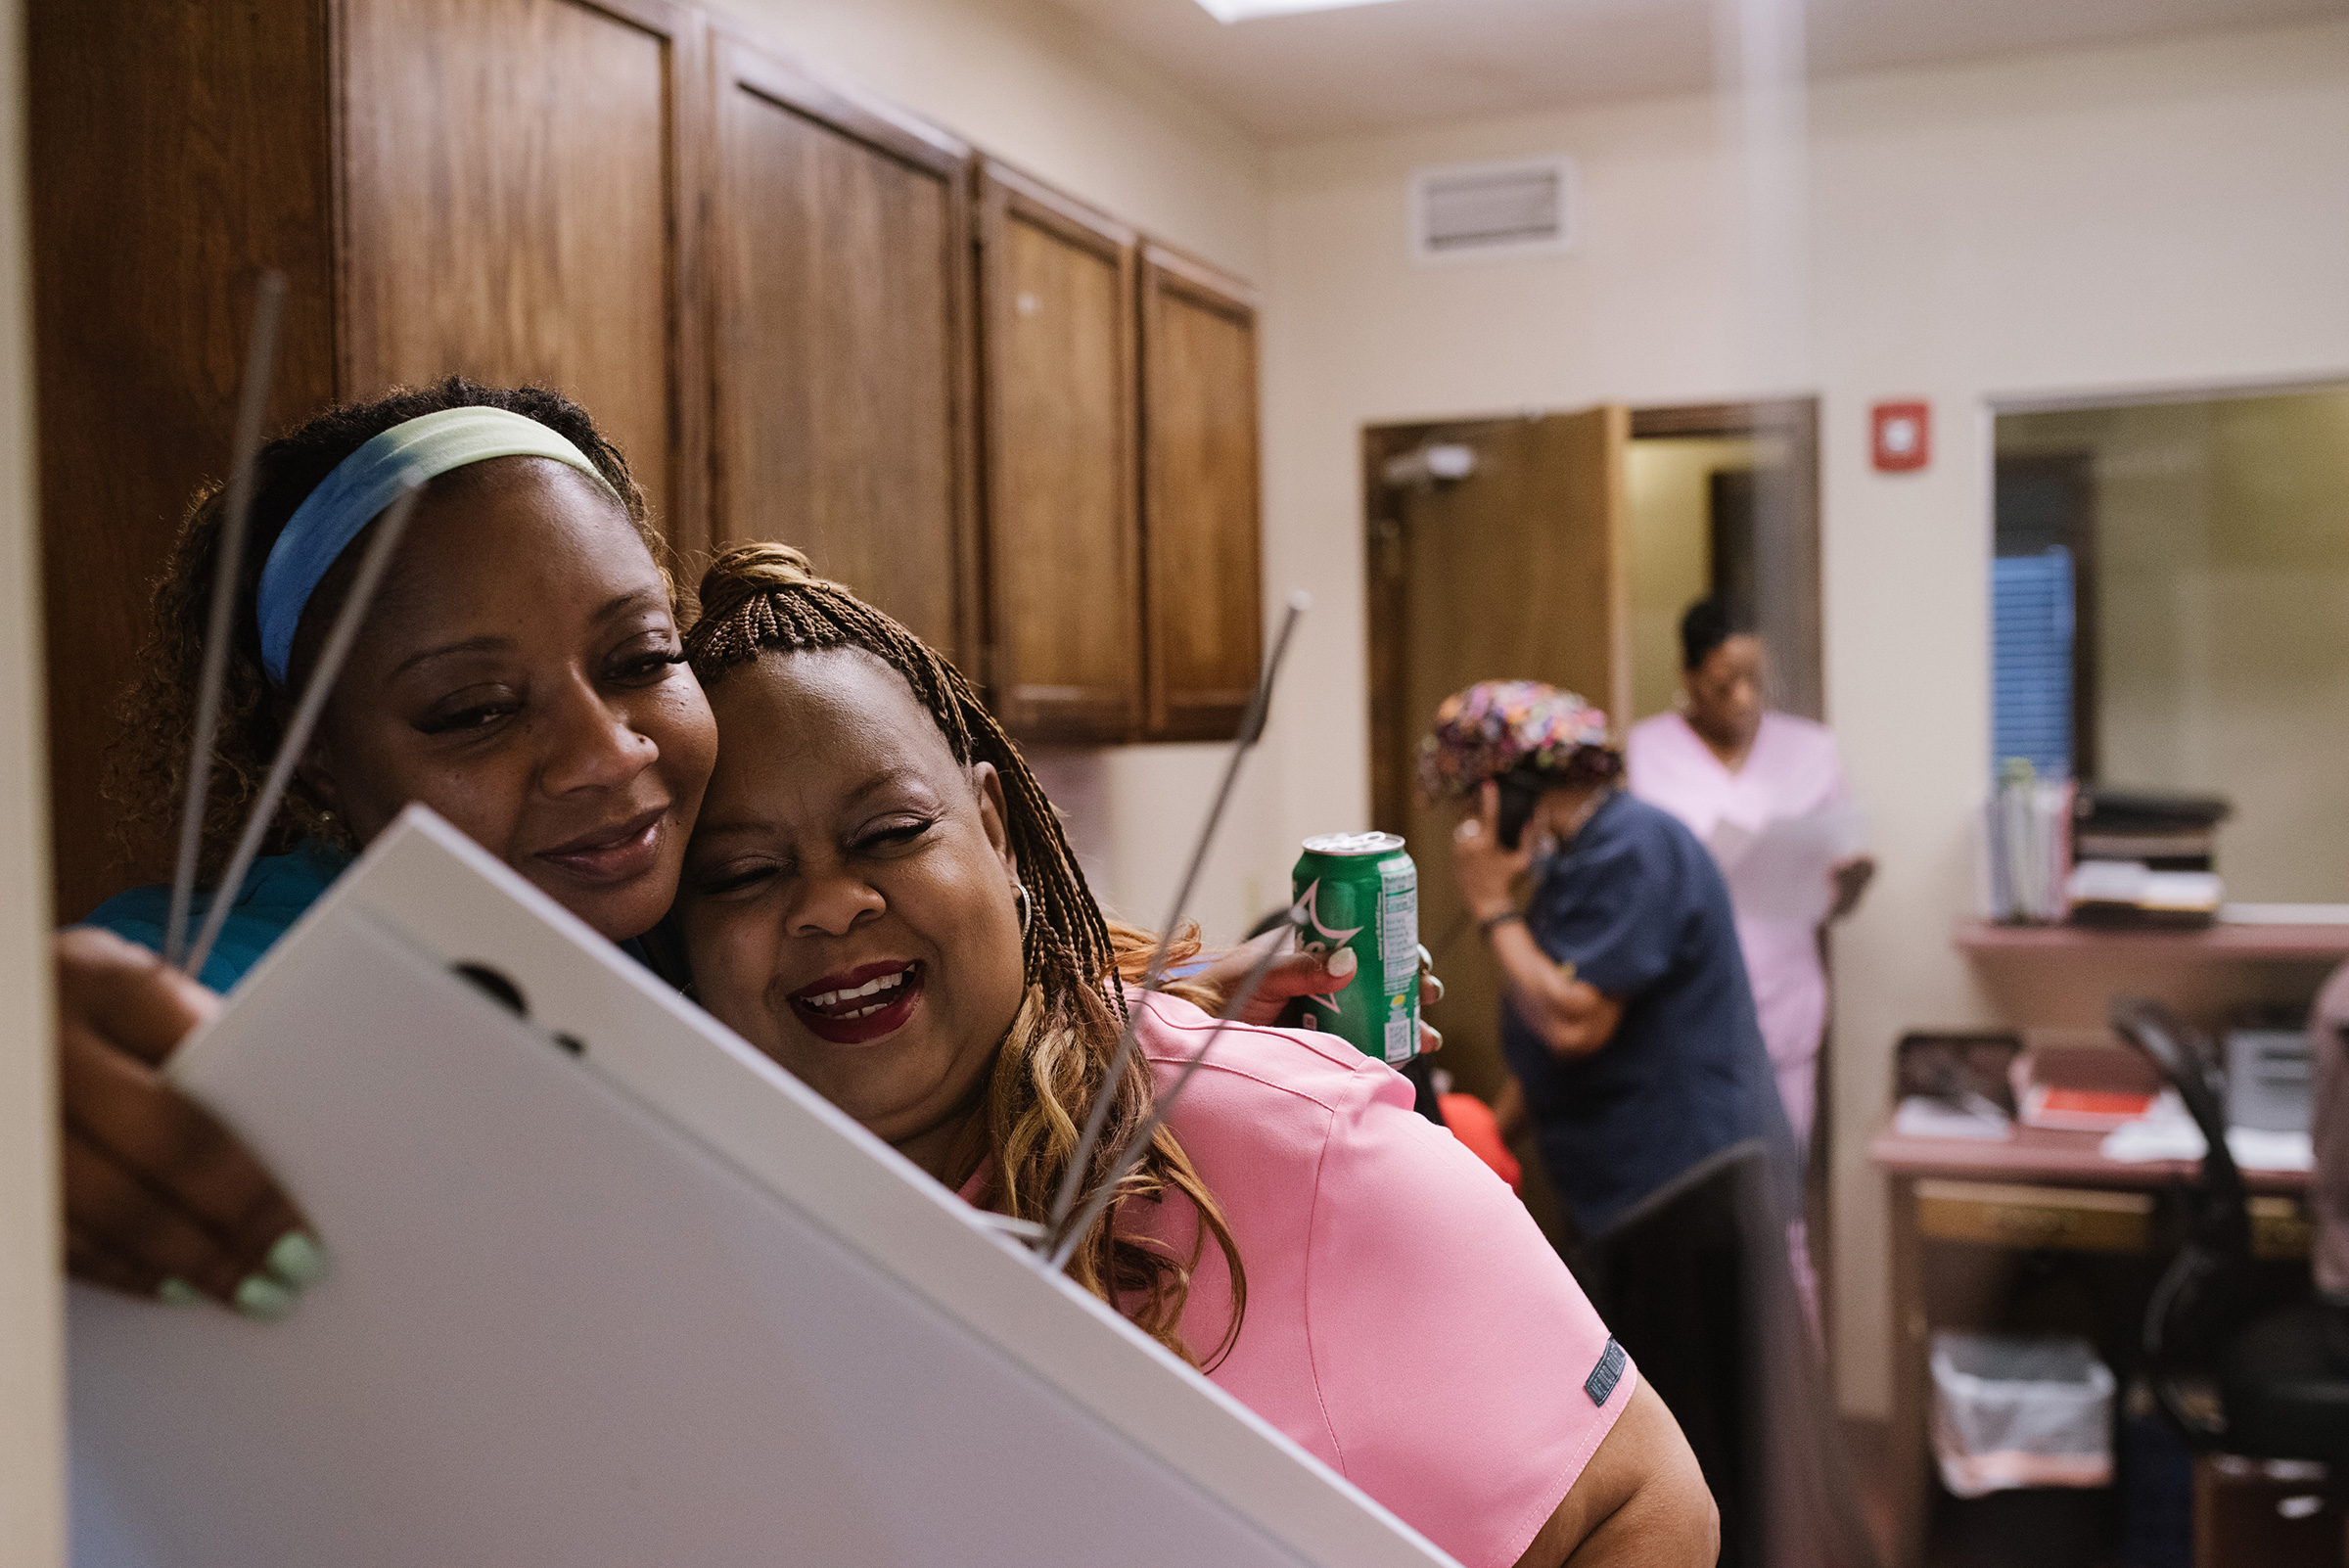 Medical assistant Ramona Wallace, left, embraces Gail Latham on July 11. (Lucy Garrett for TIME)